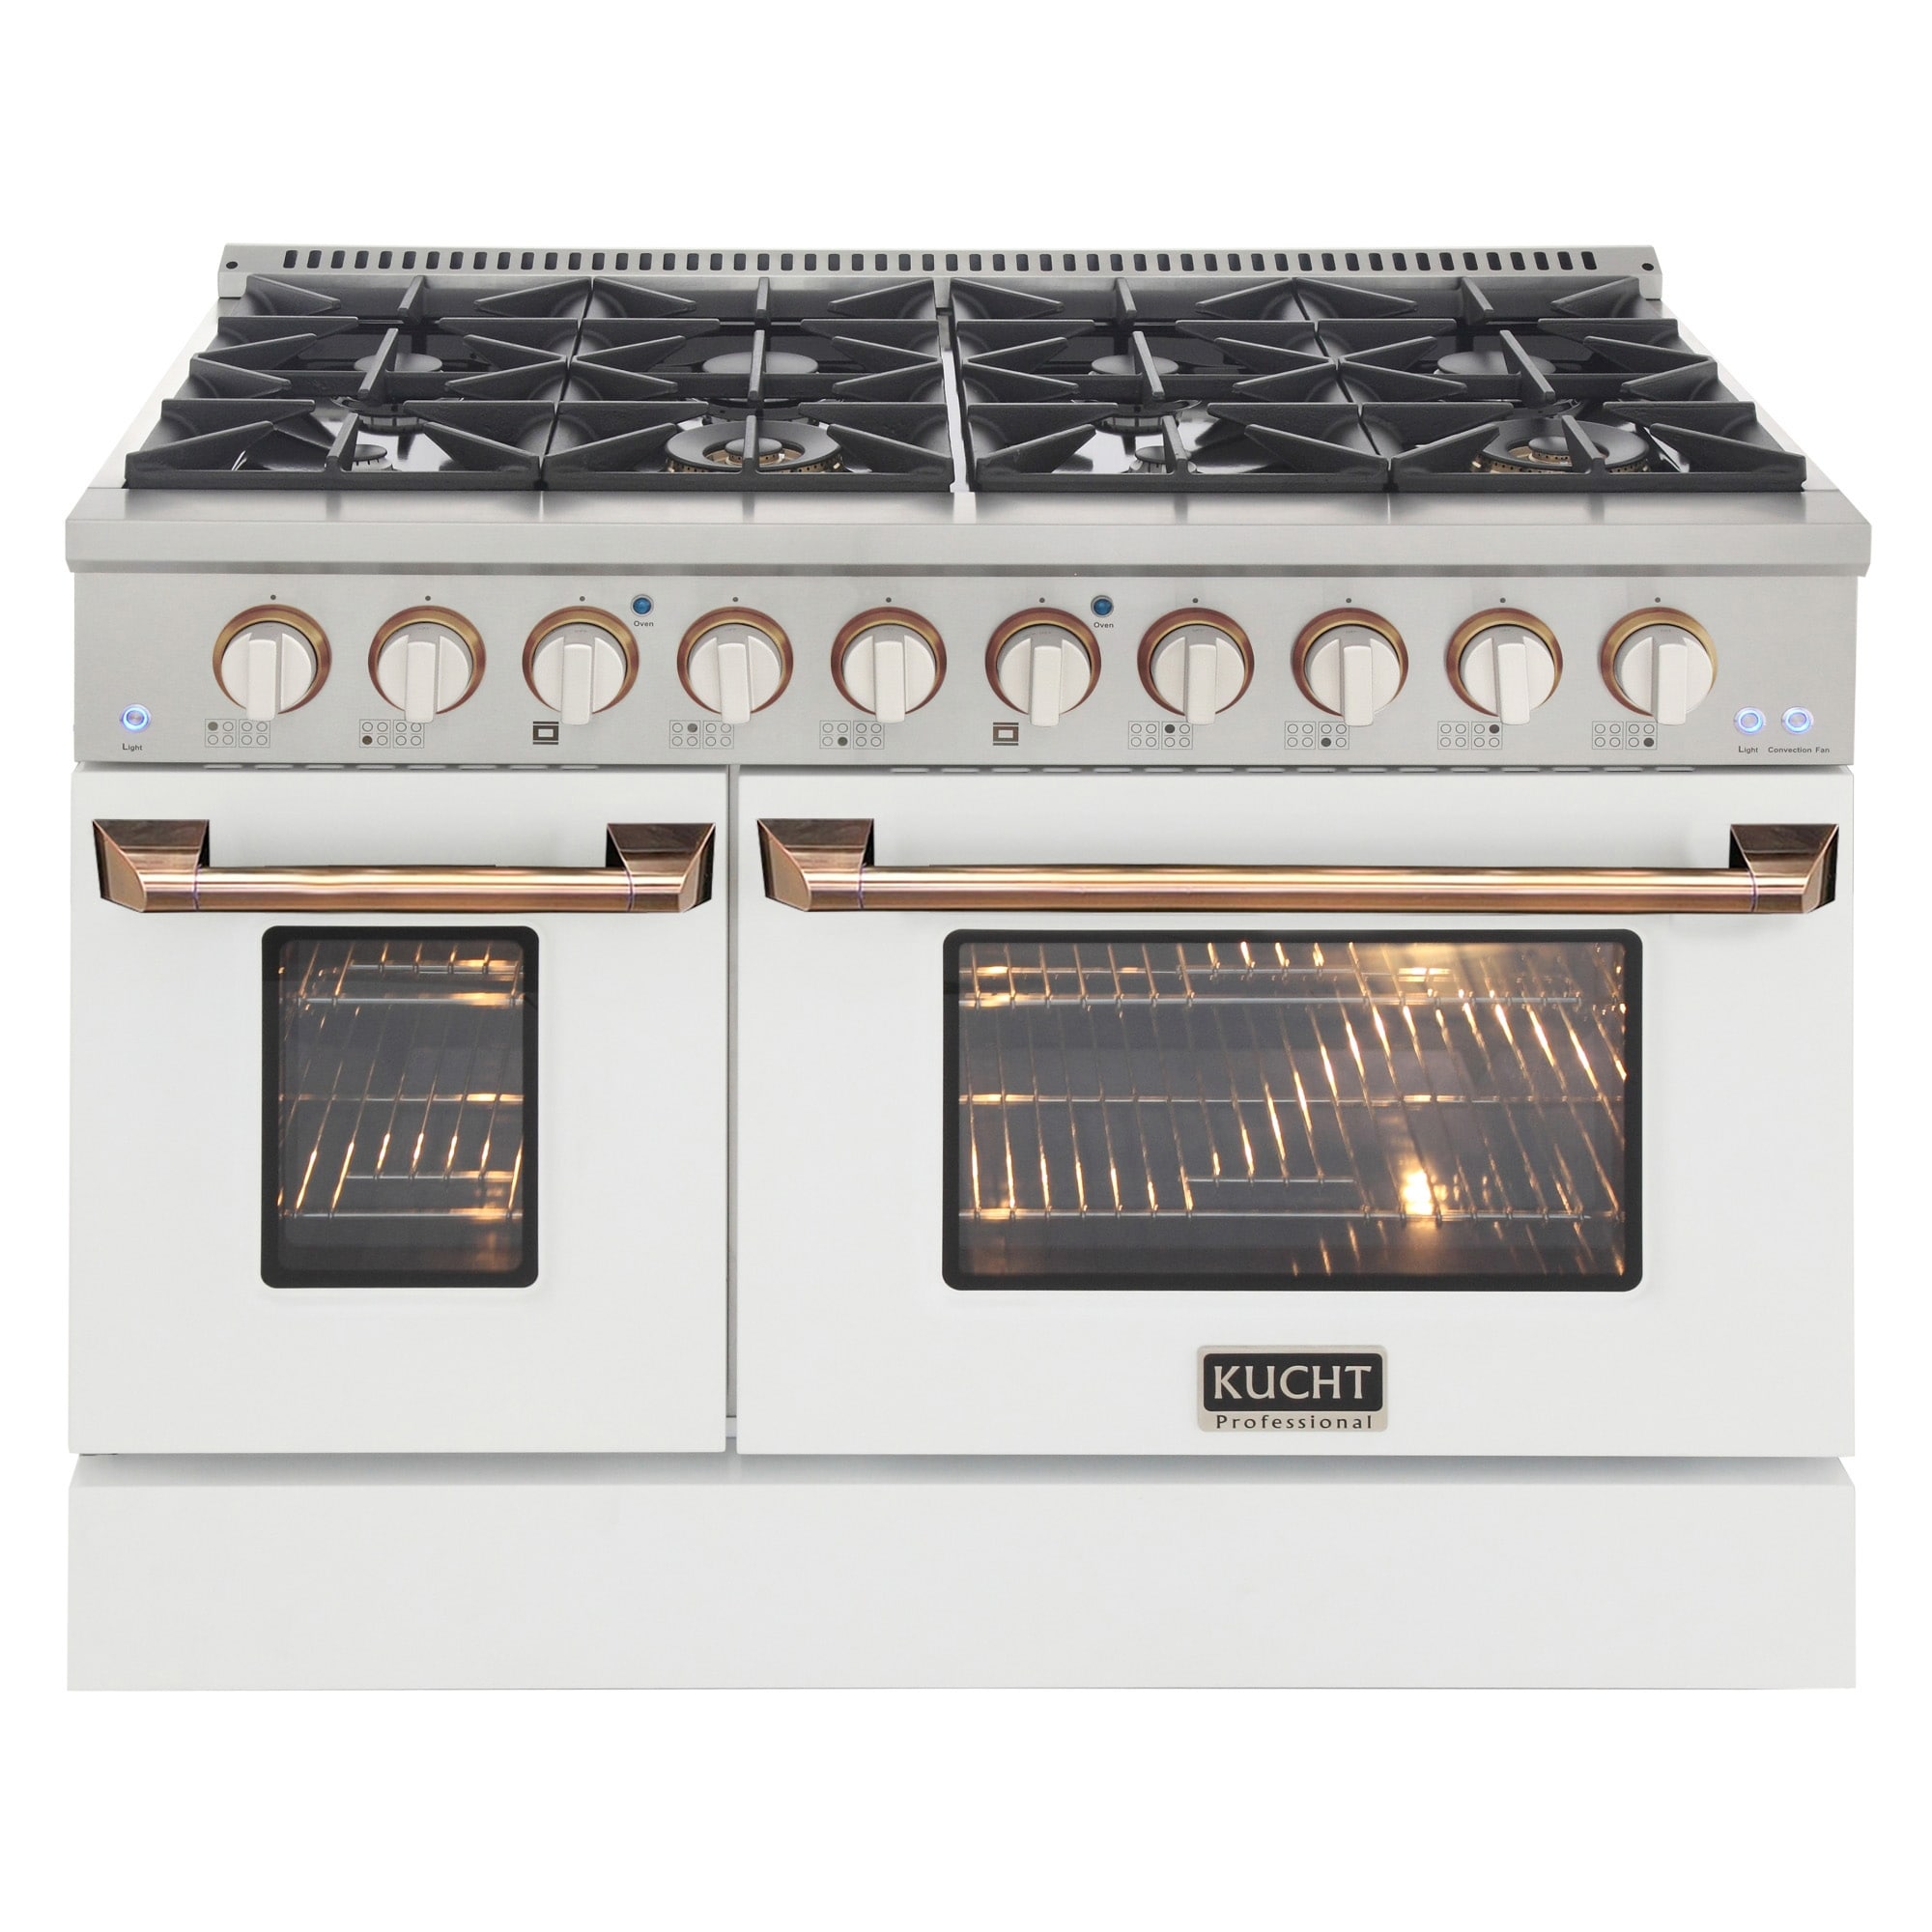 KUCHT Professional 48 in. 6.7 cu. ft. Liquid Propane Range with Sealed Burners and Convection Oven in SS with customized colours